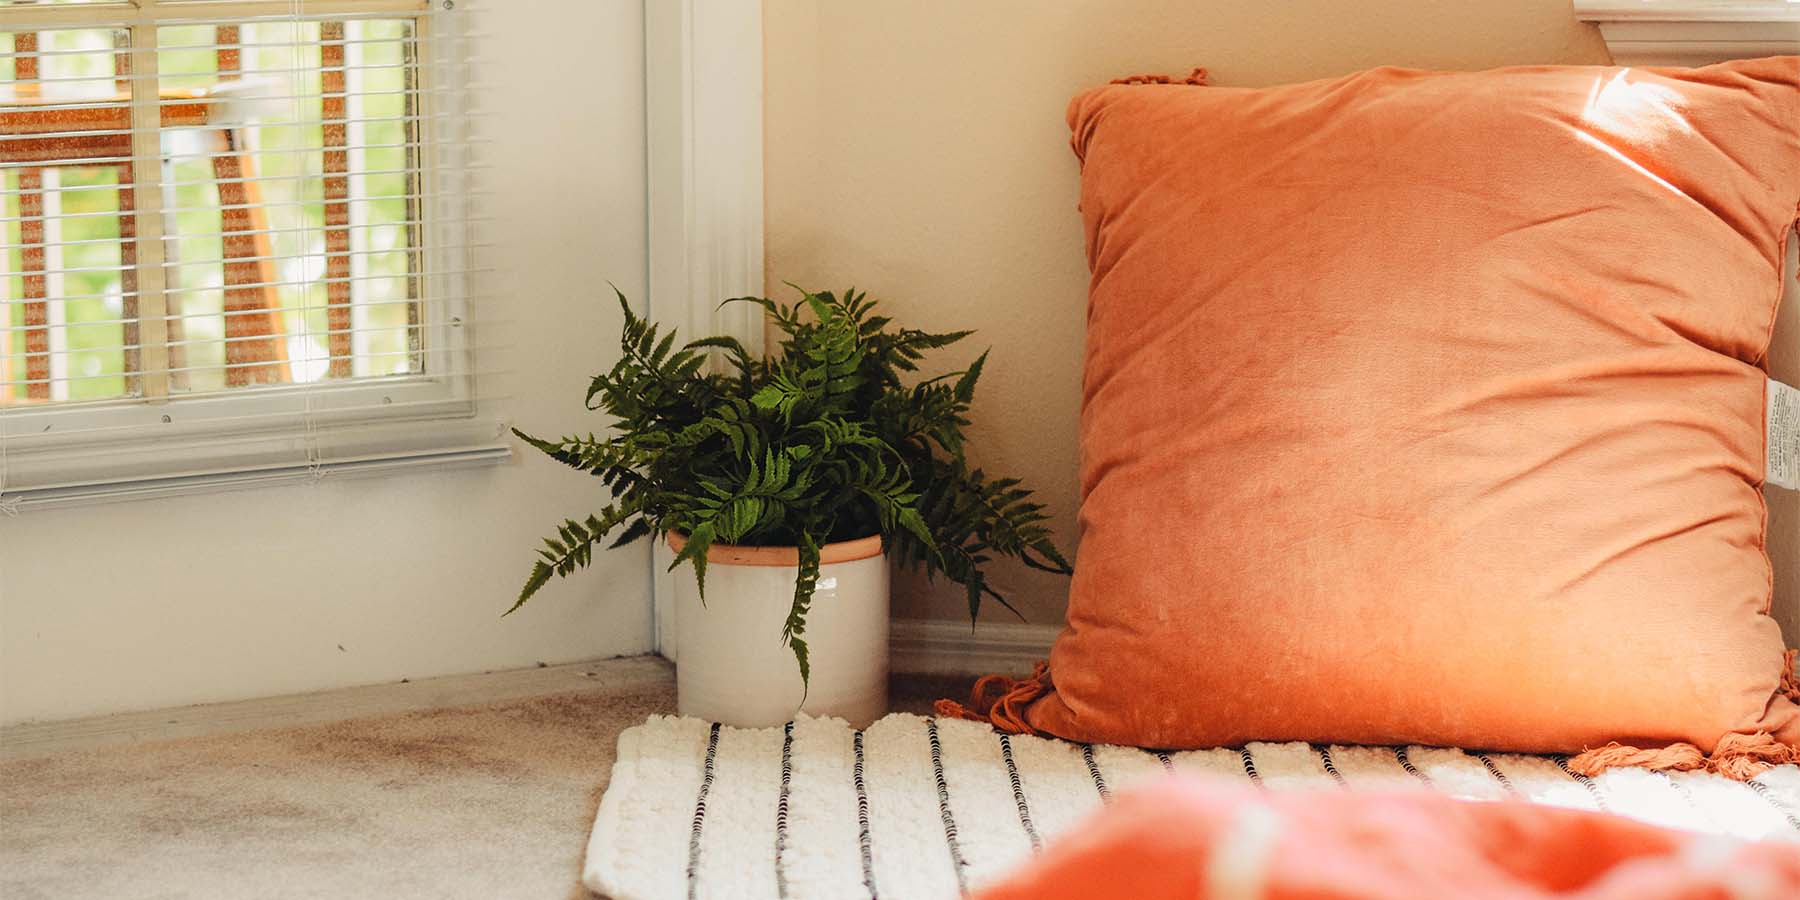 Large orange pillow on a rug on the floor next to a potted plant.